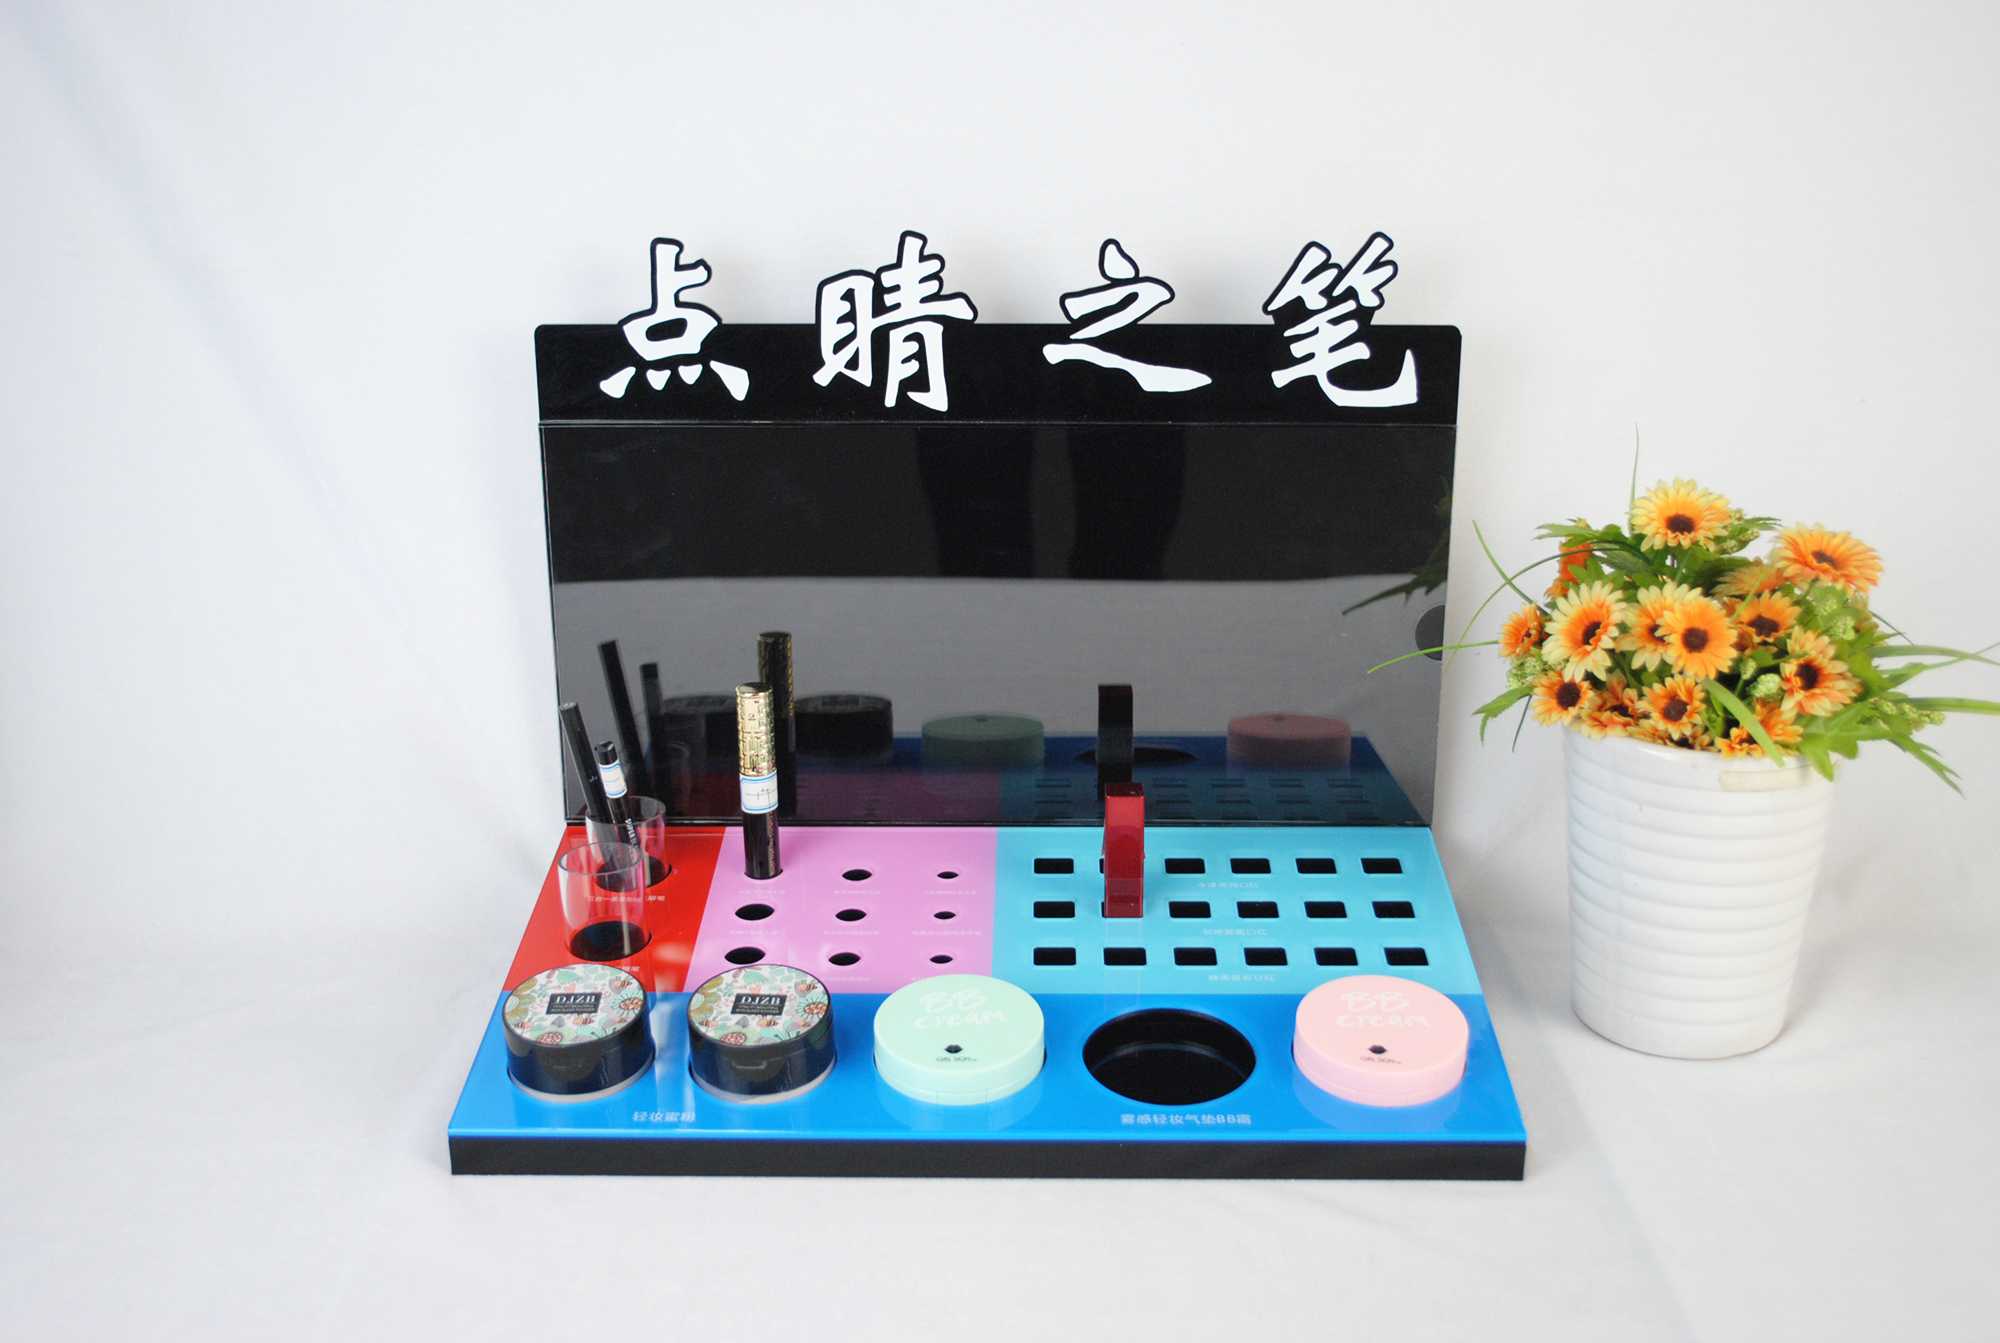 The【Finishing Eye】Makeup Display Stands Were Order...